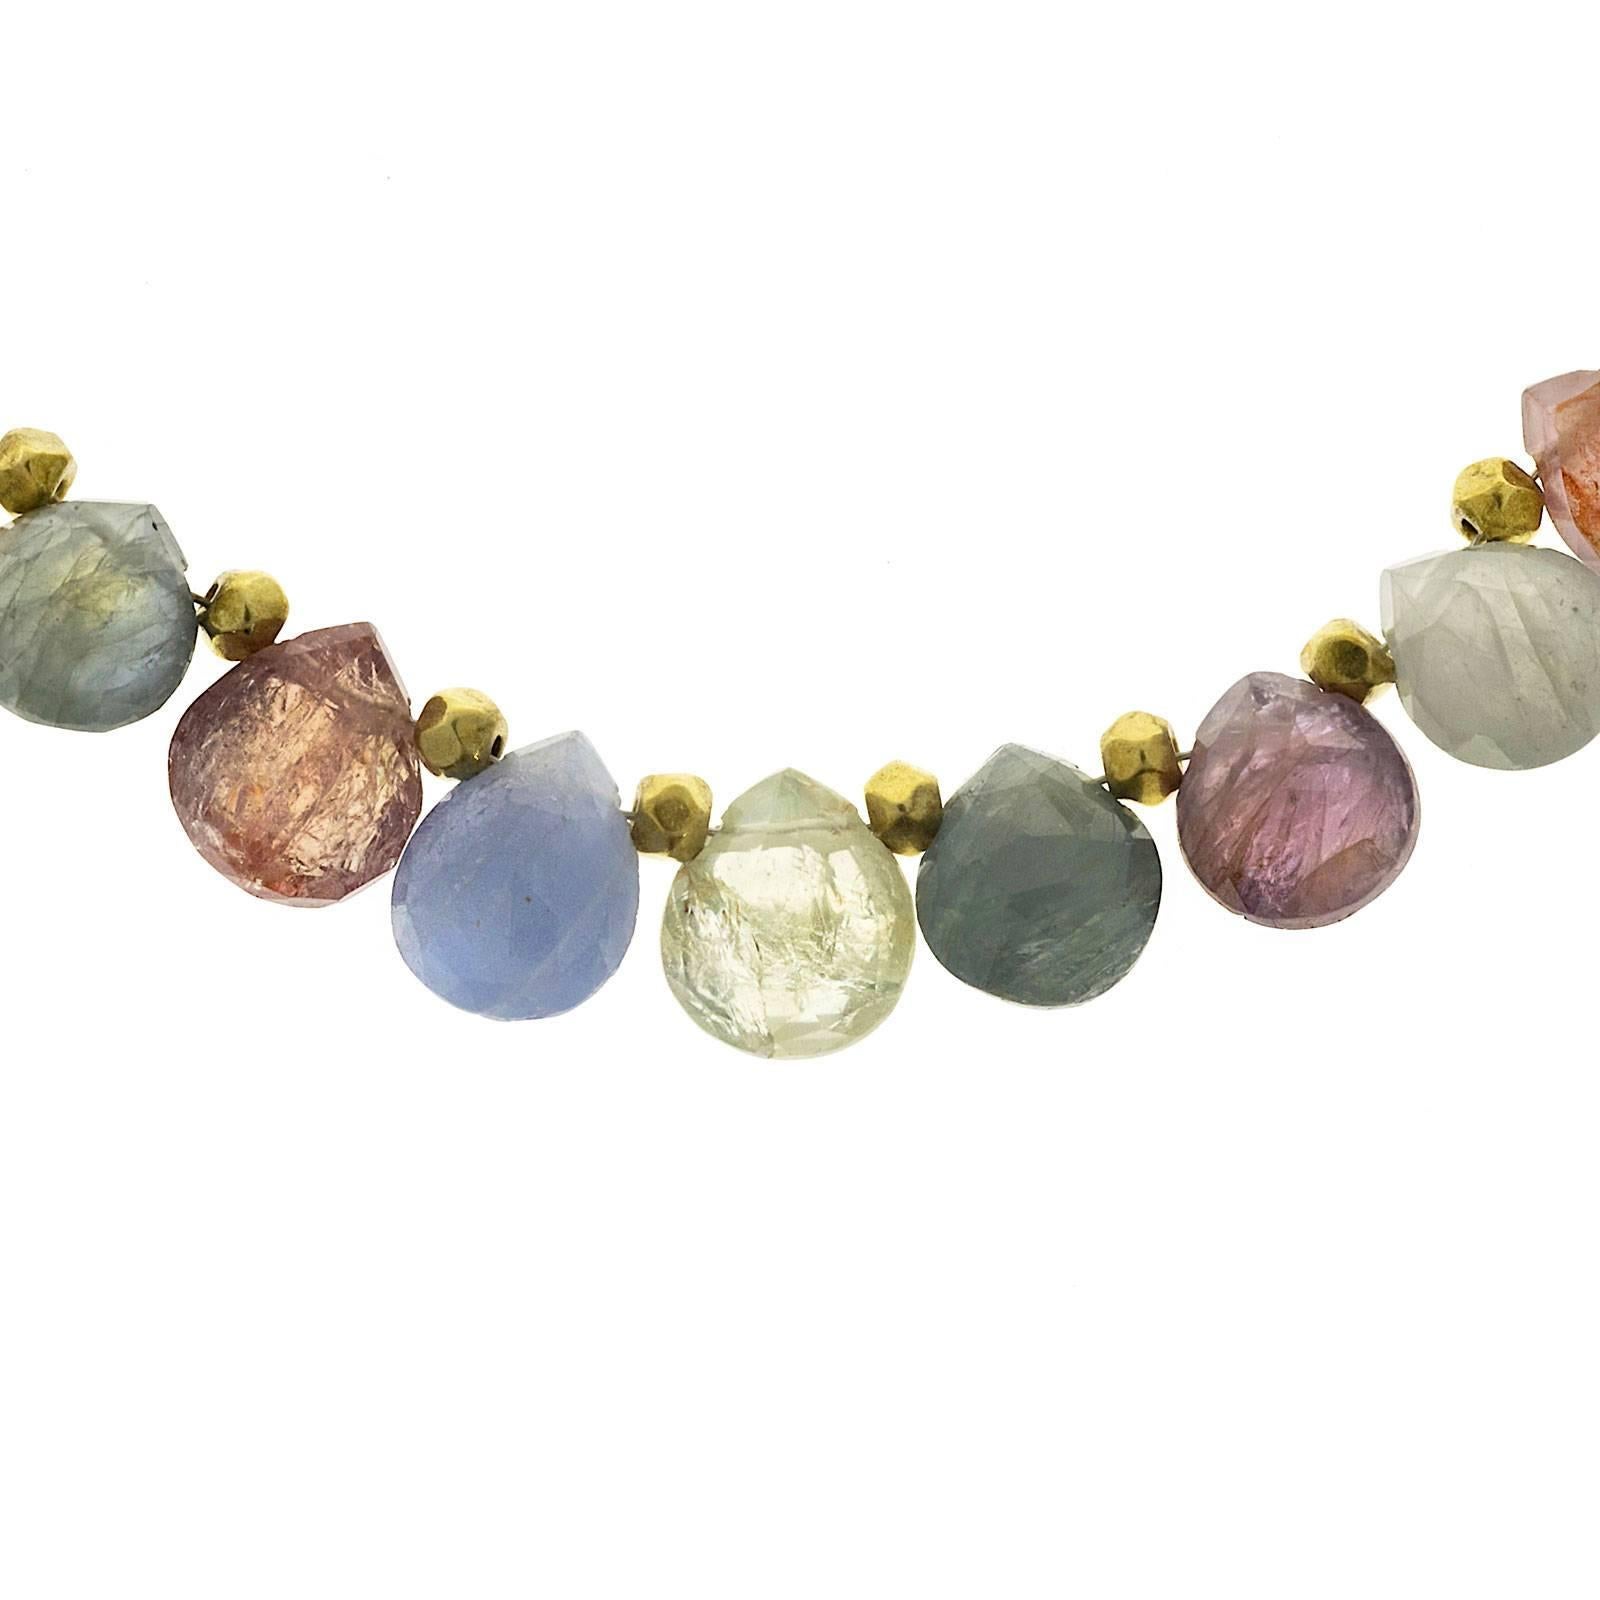 Robin Rotenier authentic sighed multi-color Sapphire necklace in soft pastel colors with 18k catch and handmade spacers.

58 drilled Briolette genuine multi pastel color Sapphires, approx. total weight 24.00cts, moderate inclusions, some eye